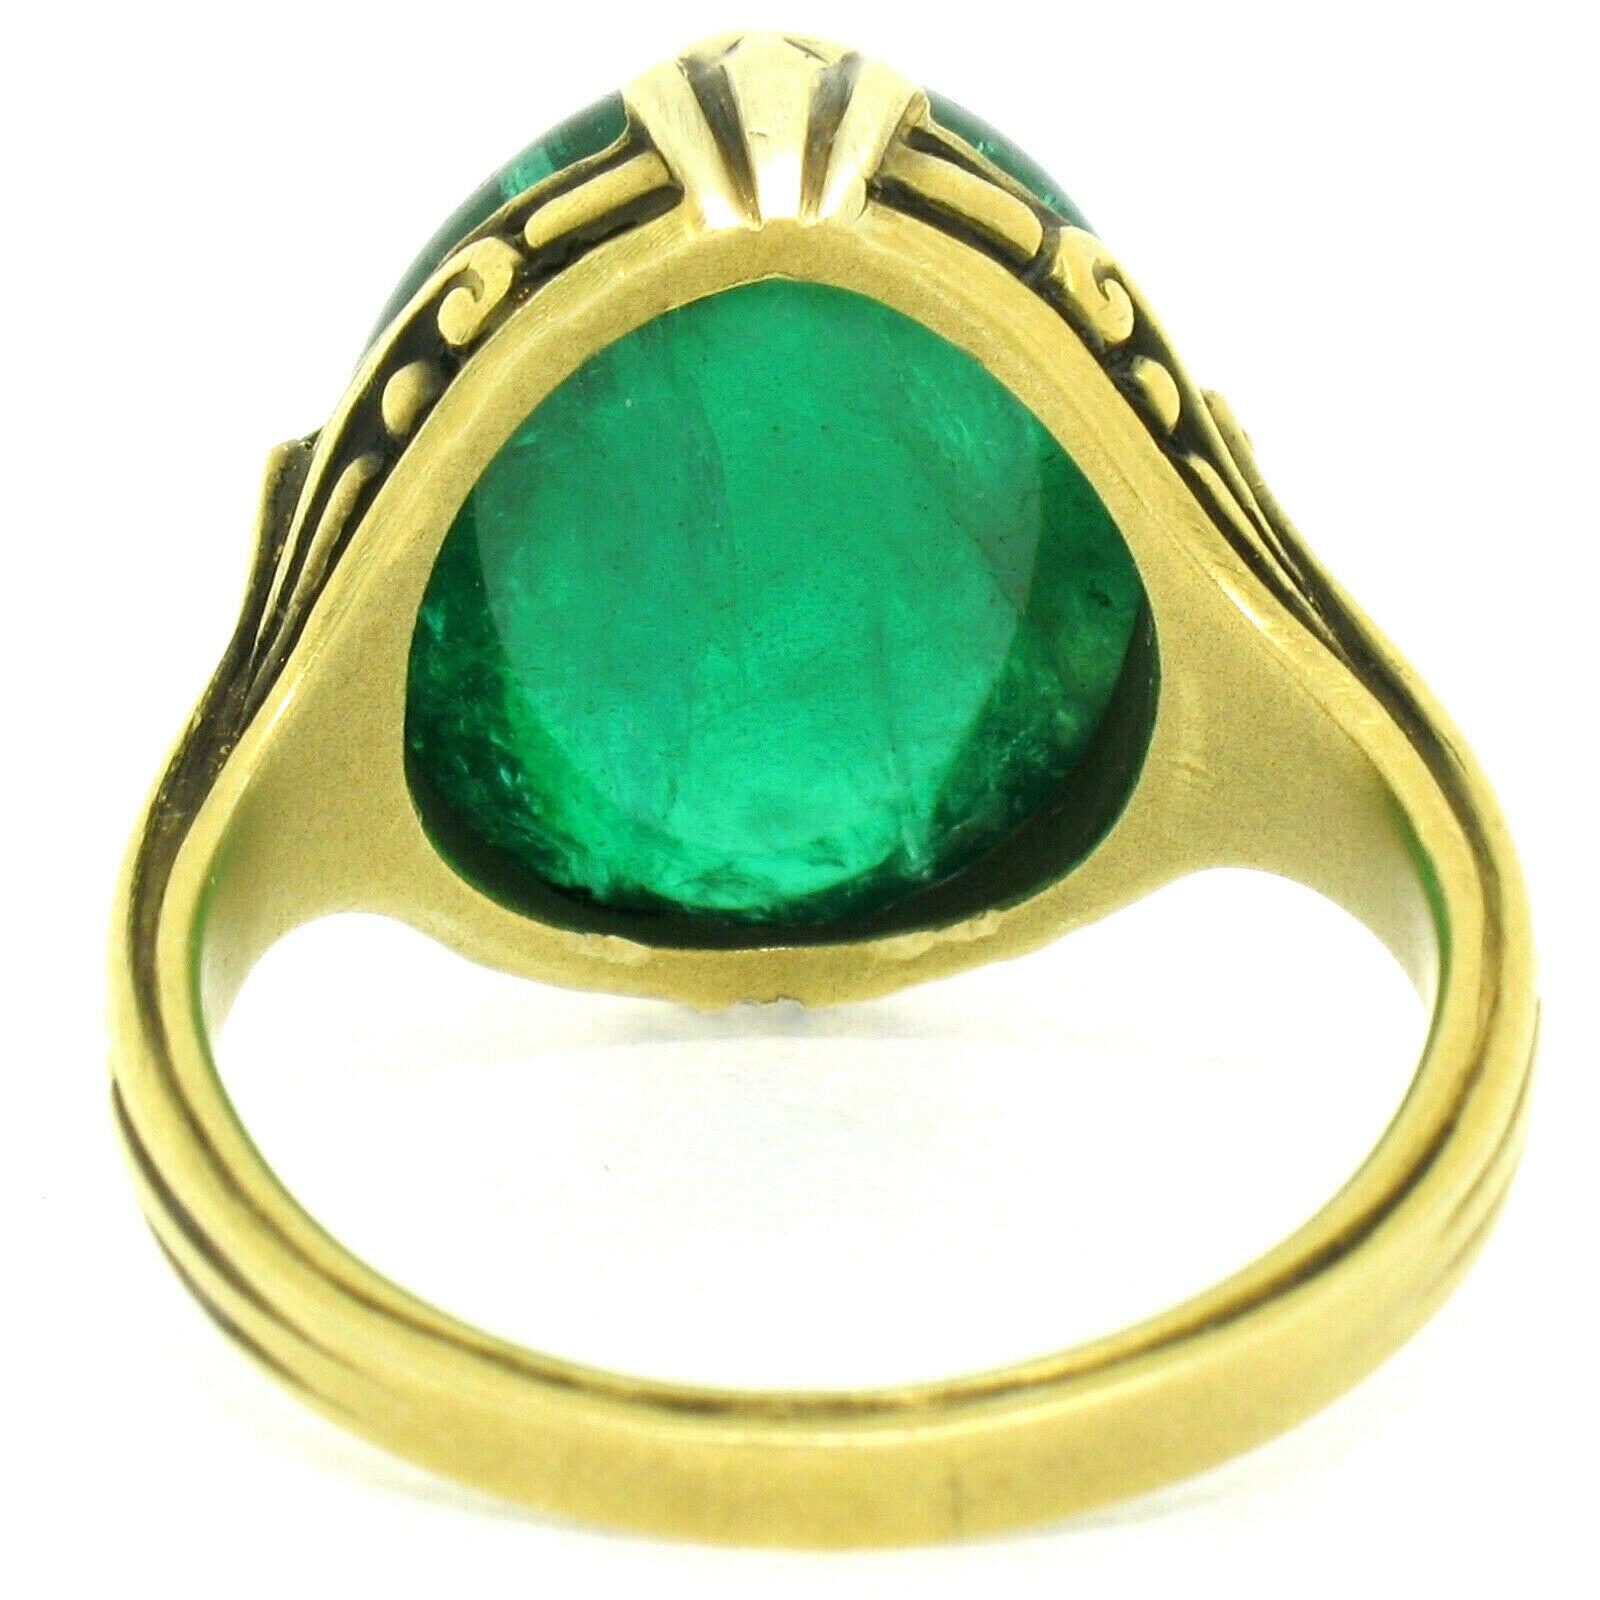 Antique 14k Gold 10.03ct GIA Oval Cabochon Very Fine Green Zambian Emerald Ring 3